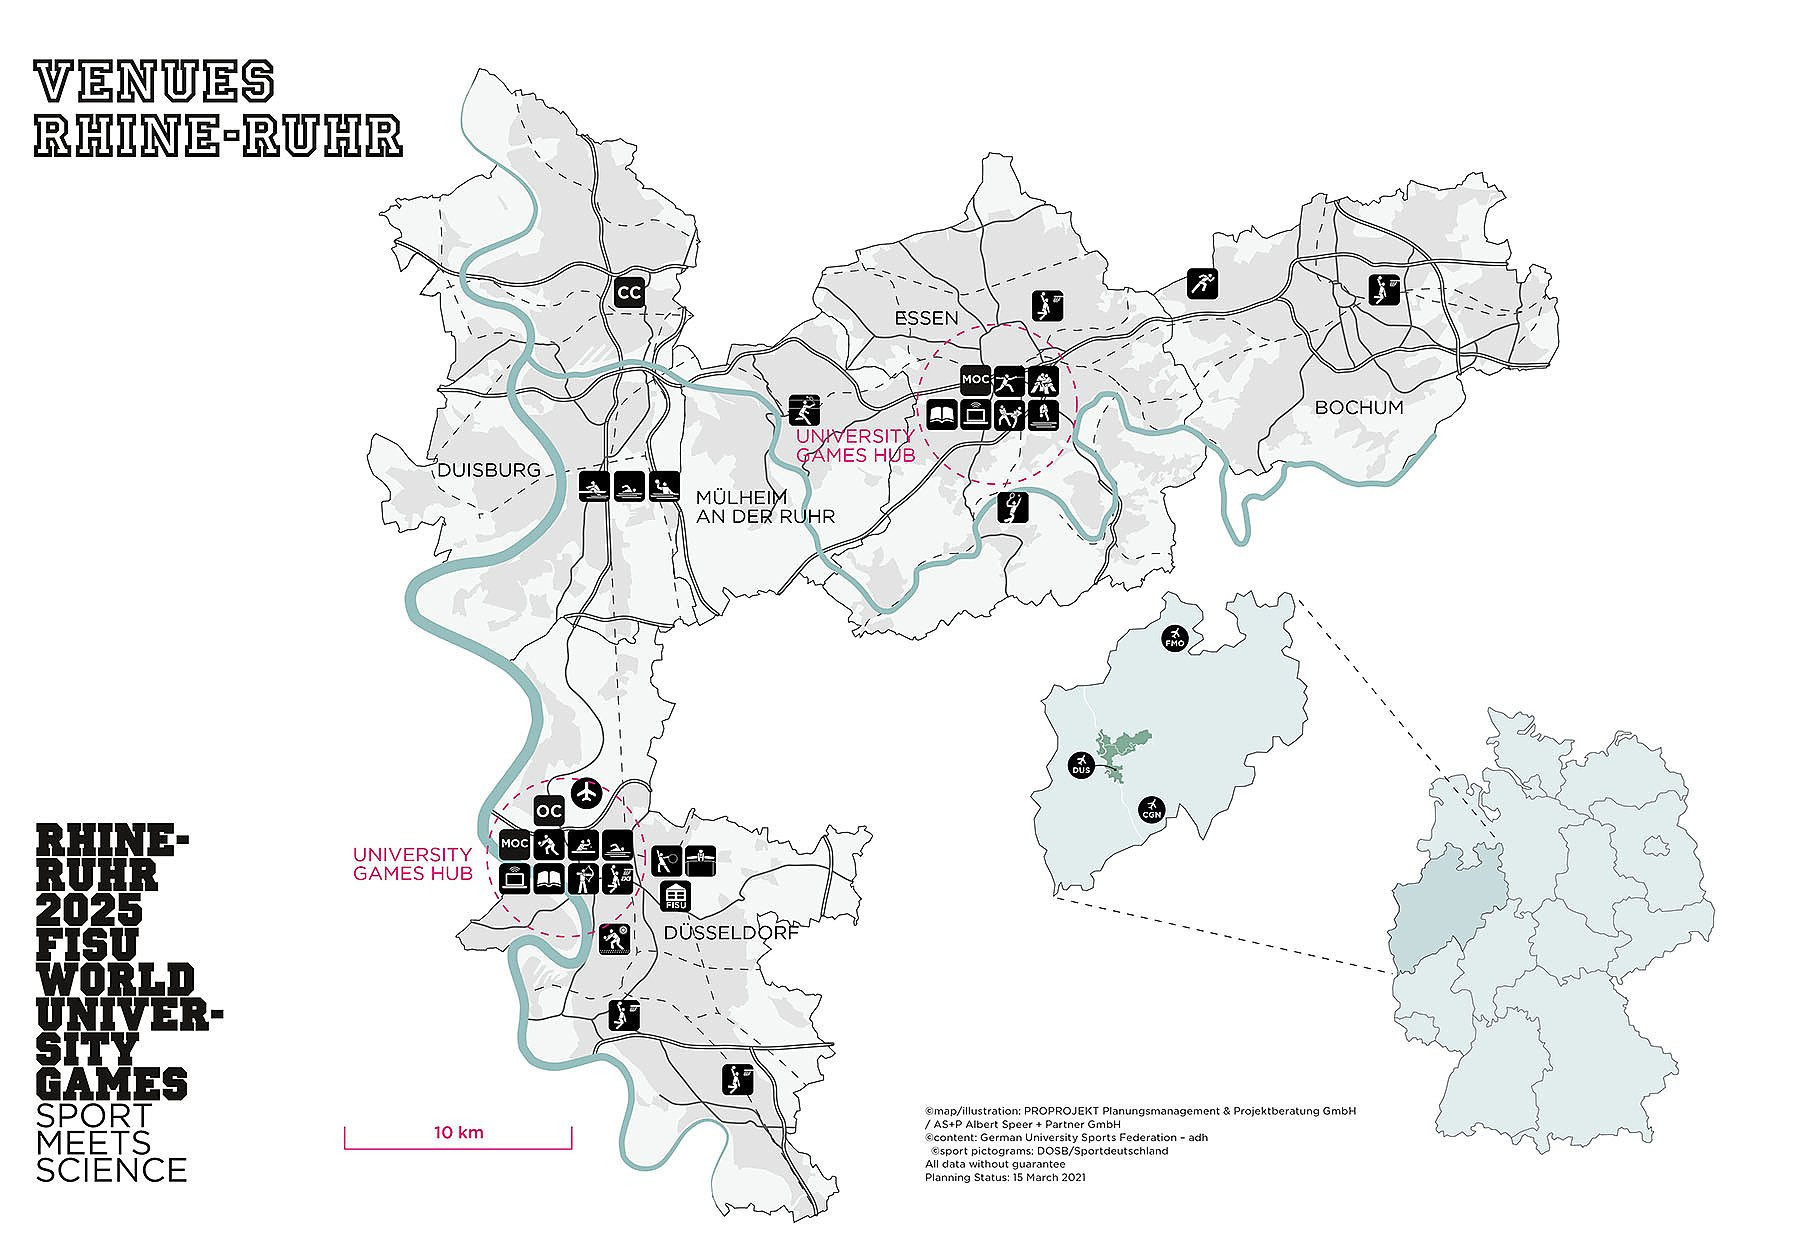 The map of Rhine-Ruhr, showing venues for the Games ©Rhine-Ruhr 2025